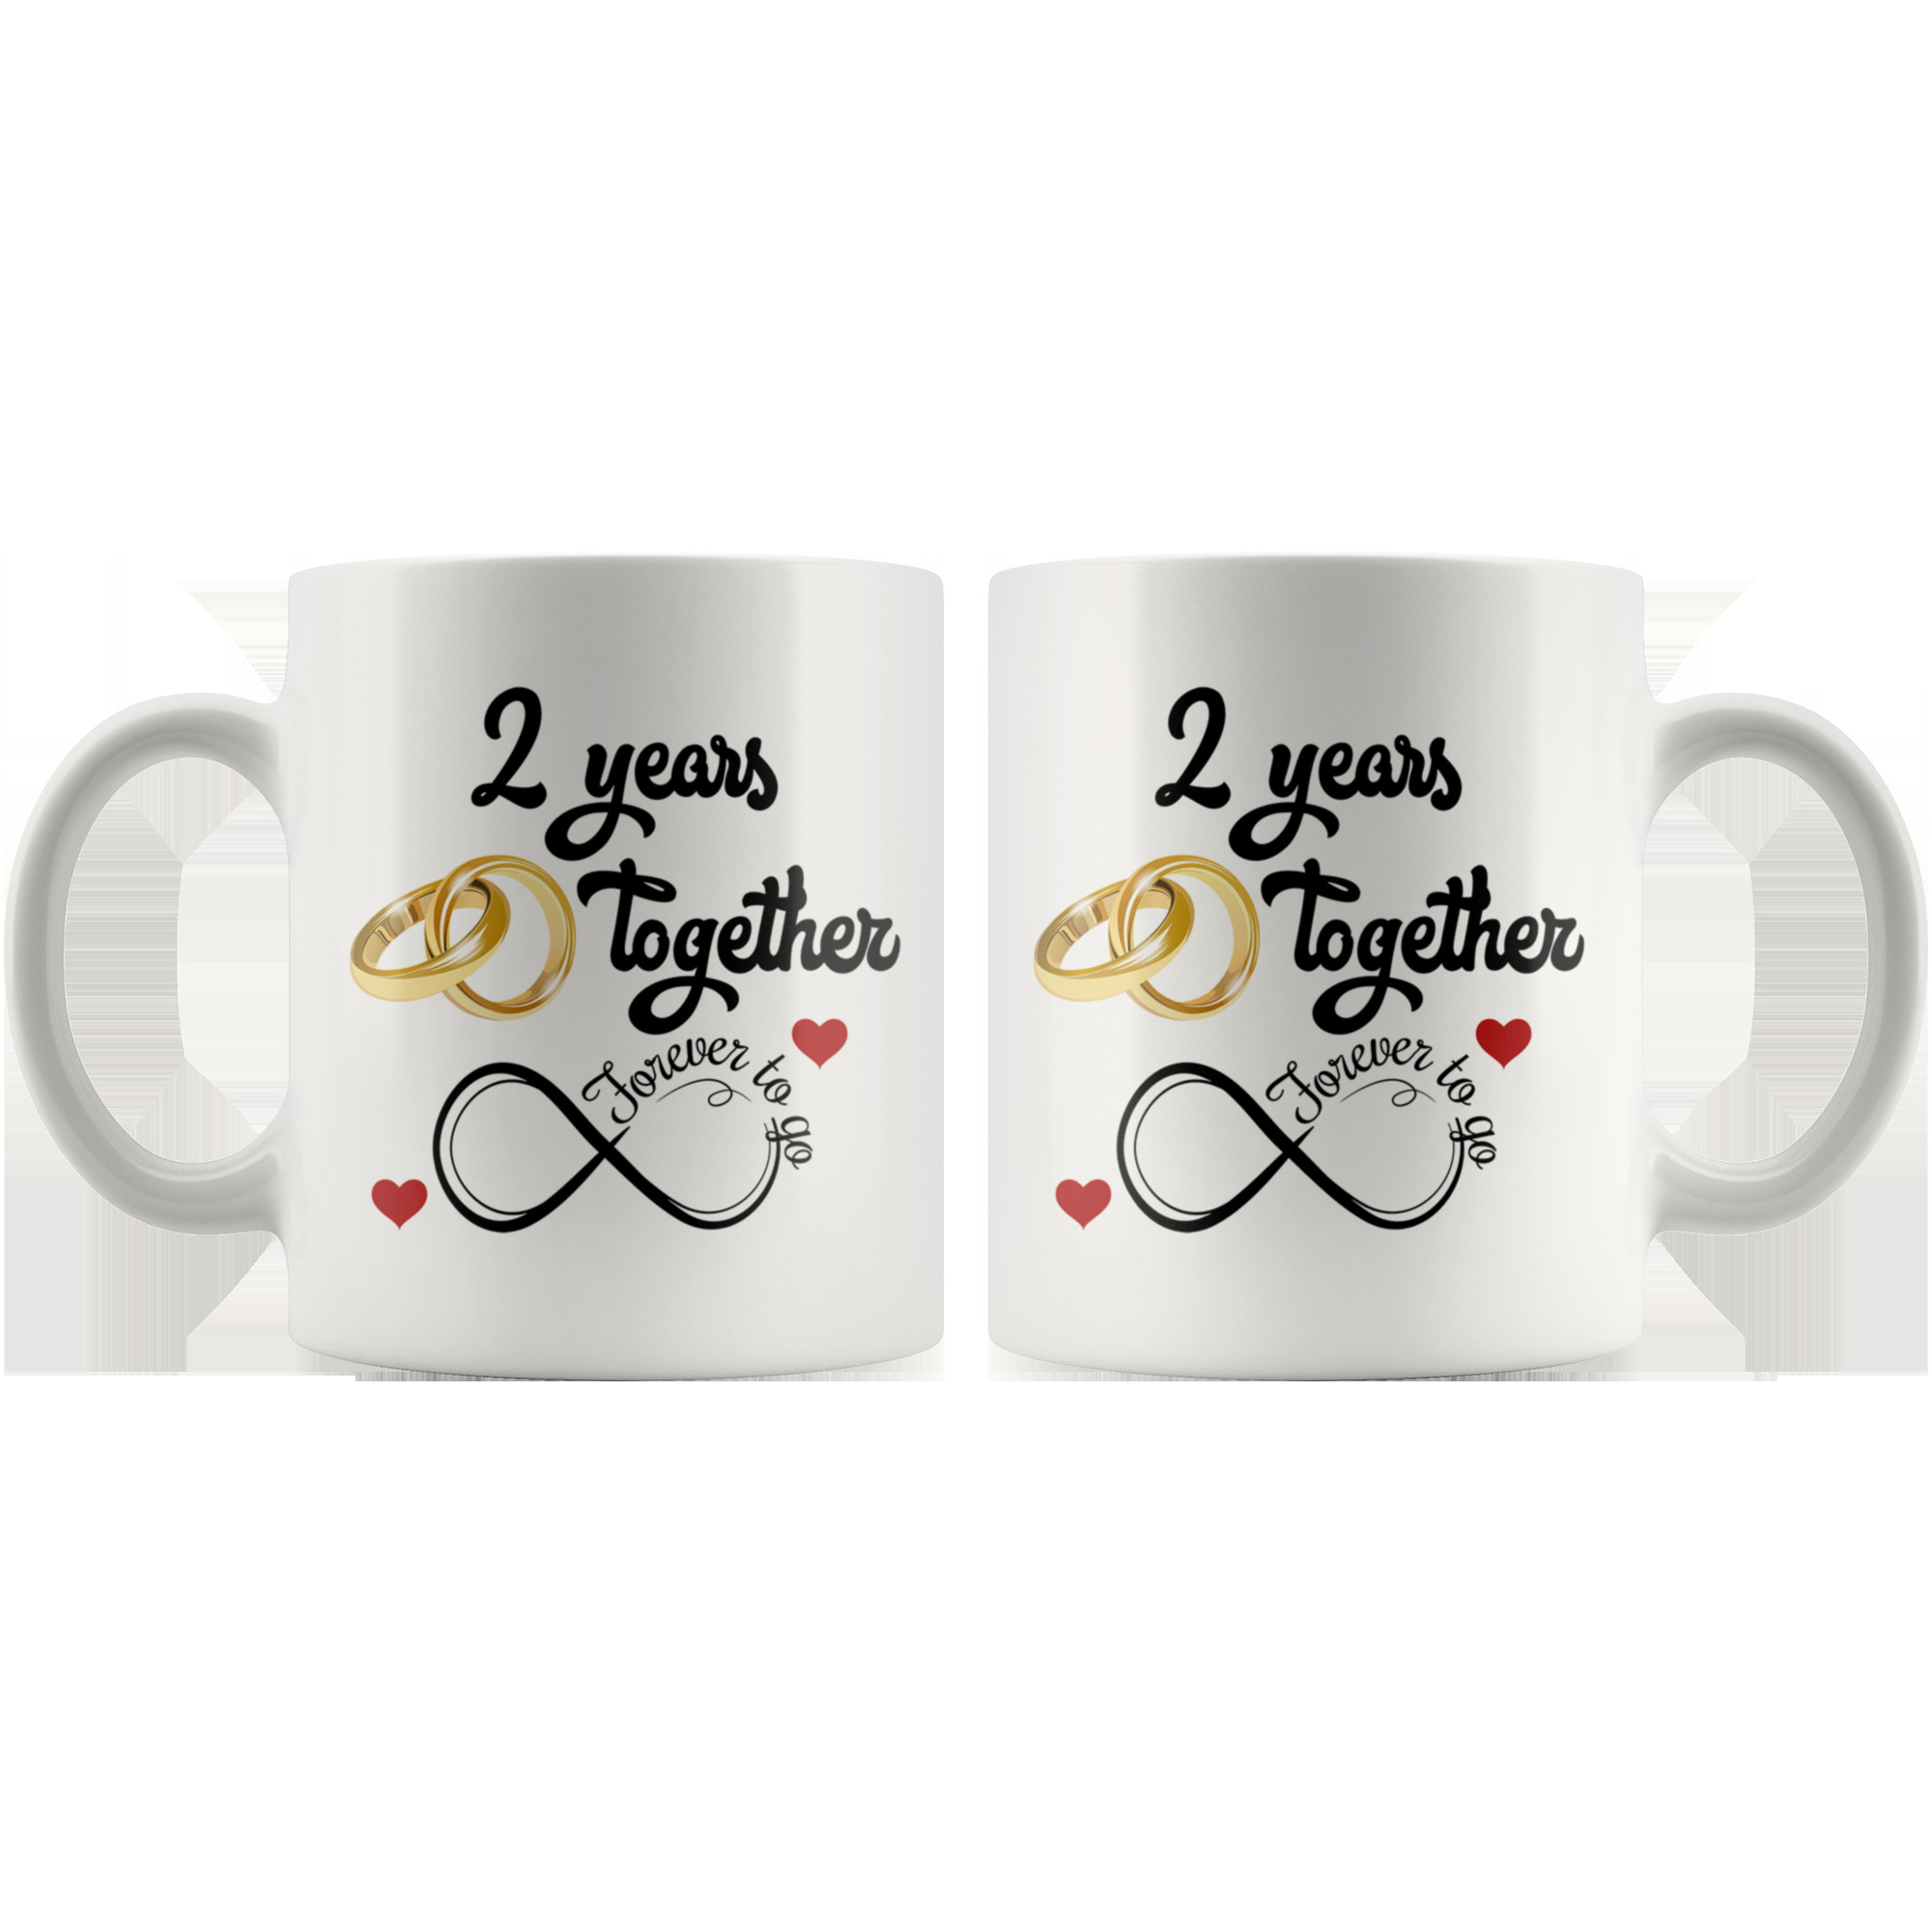 Second Anniversary Gift Ideas For Her
 Second Wedding Anniversary Gift For Him And Her 2nd